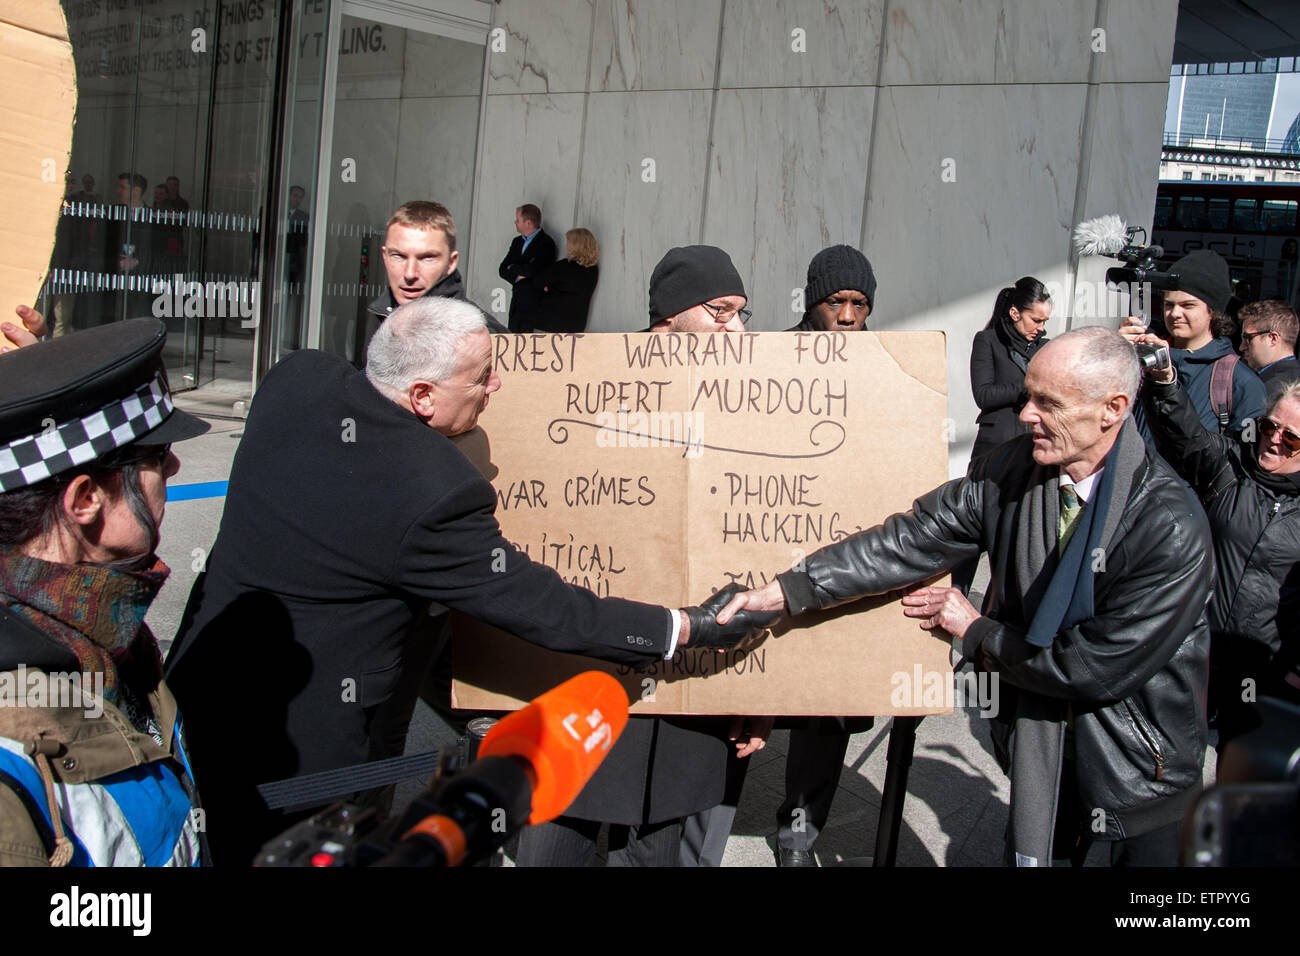 Occupy protesters gather outside the headquarters of News UK, owners of the Sun newspaper to hold an 'Occupy Rupert Murdoch' protest and hand out copies of 'The Occupied Sun.'  Featuring: Donnachadh McCarthy Where: London, United Kingdom When: 23 Mar 2015 Credit: Peter Maclaine/WENN.com Stock Photo